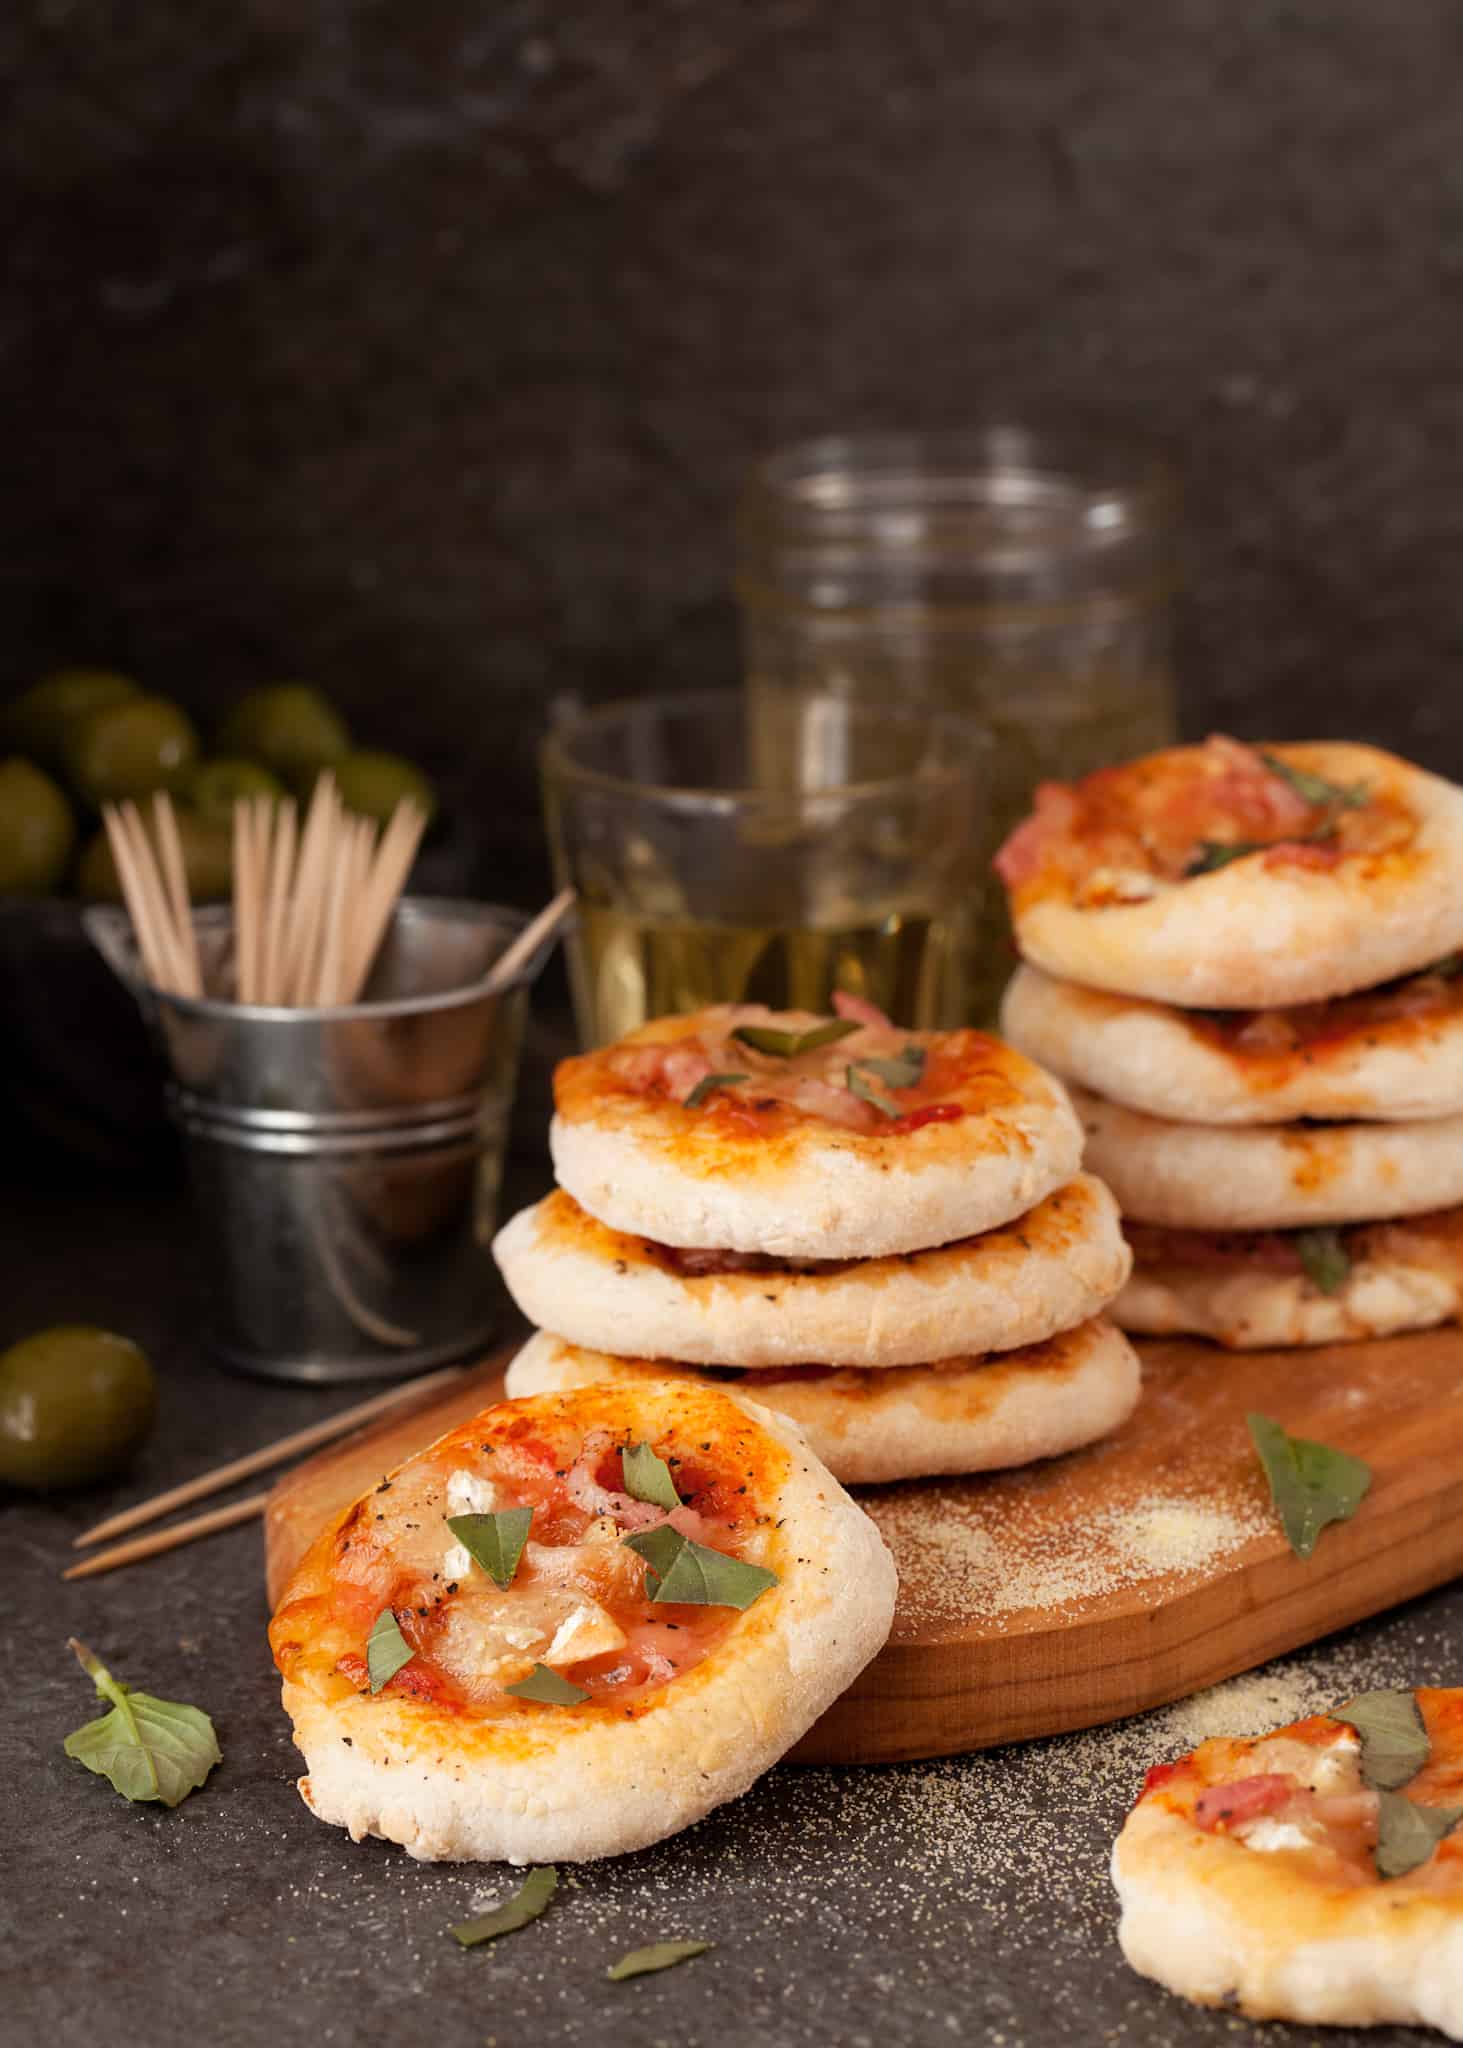 Make these Bacon Brie Basil Mini Pizzas for Game Day! #gameday #appetizer #pizza #fingerfood